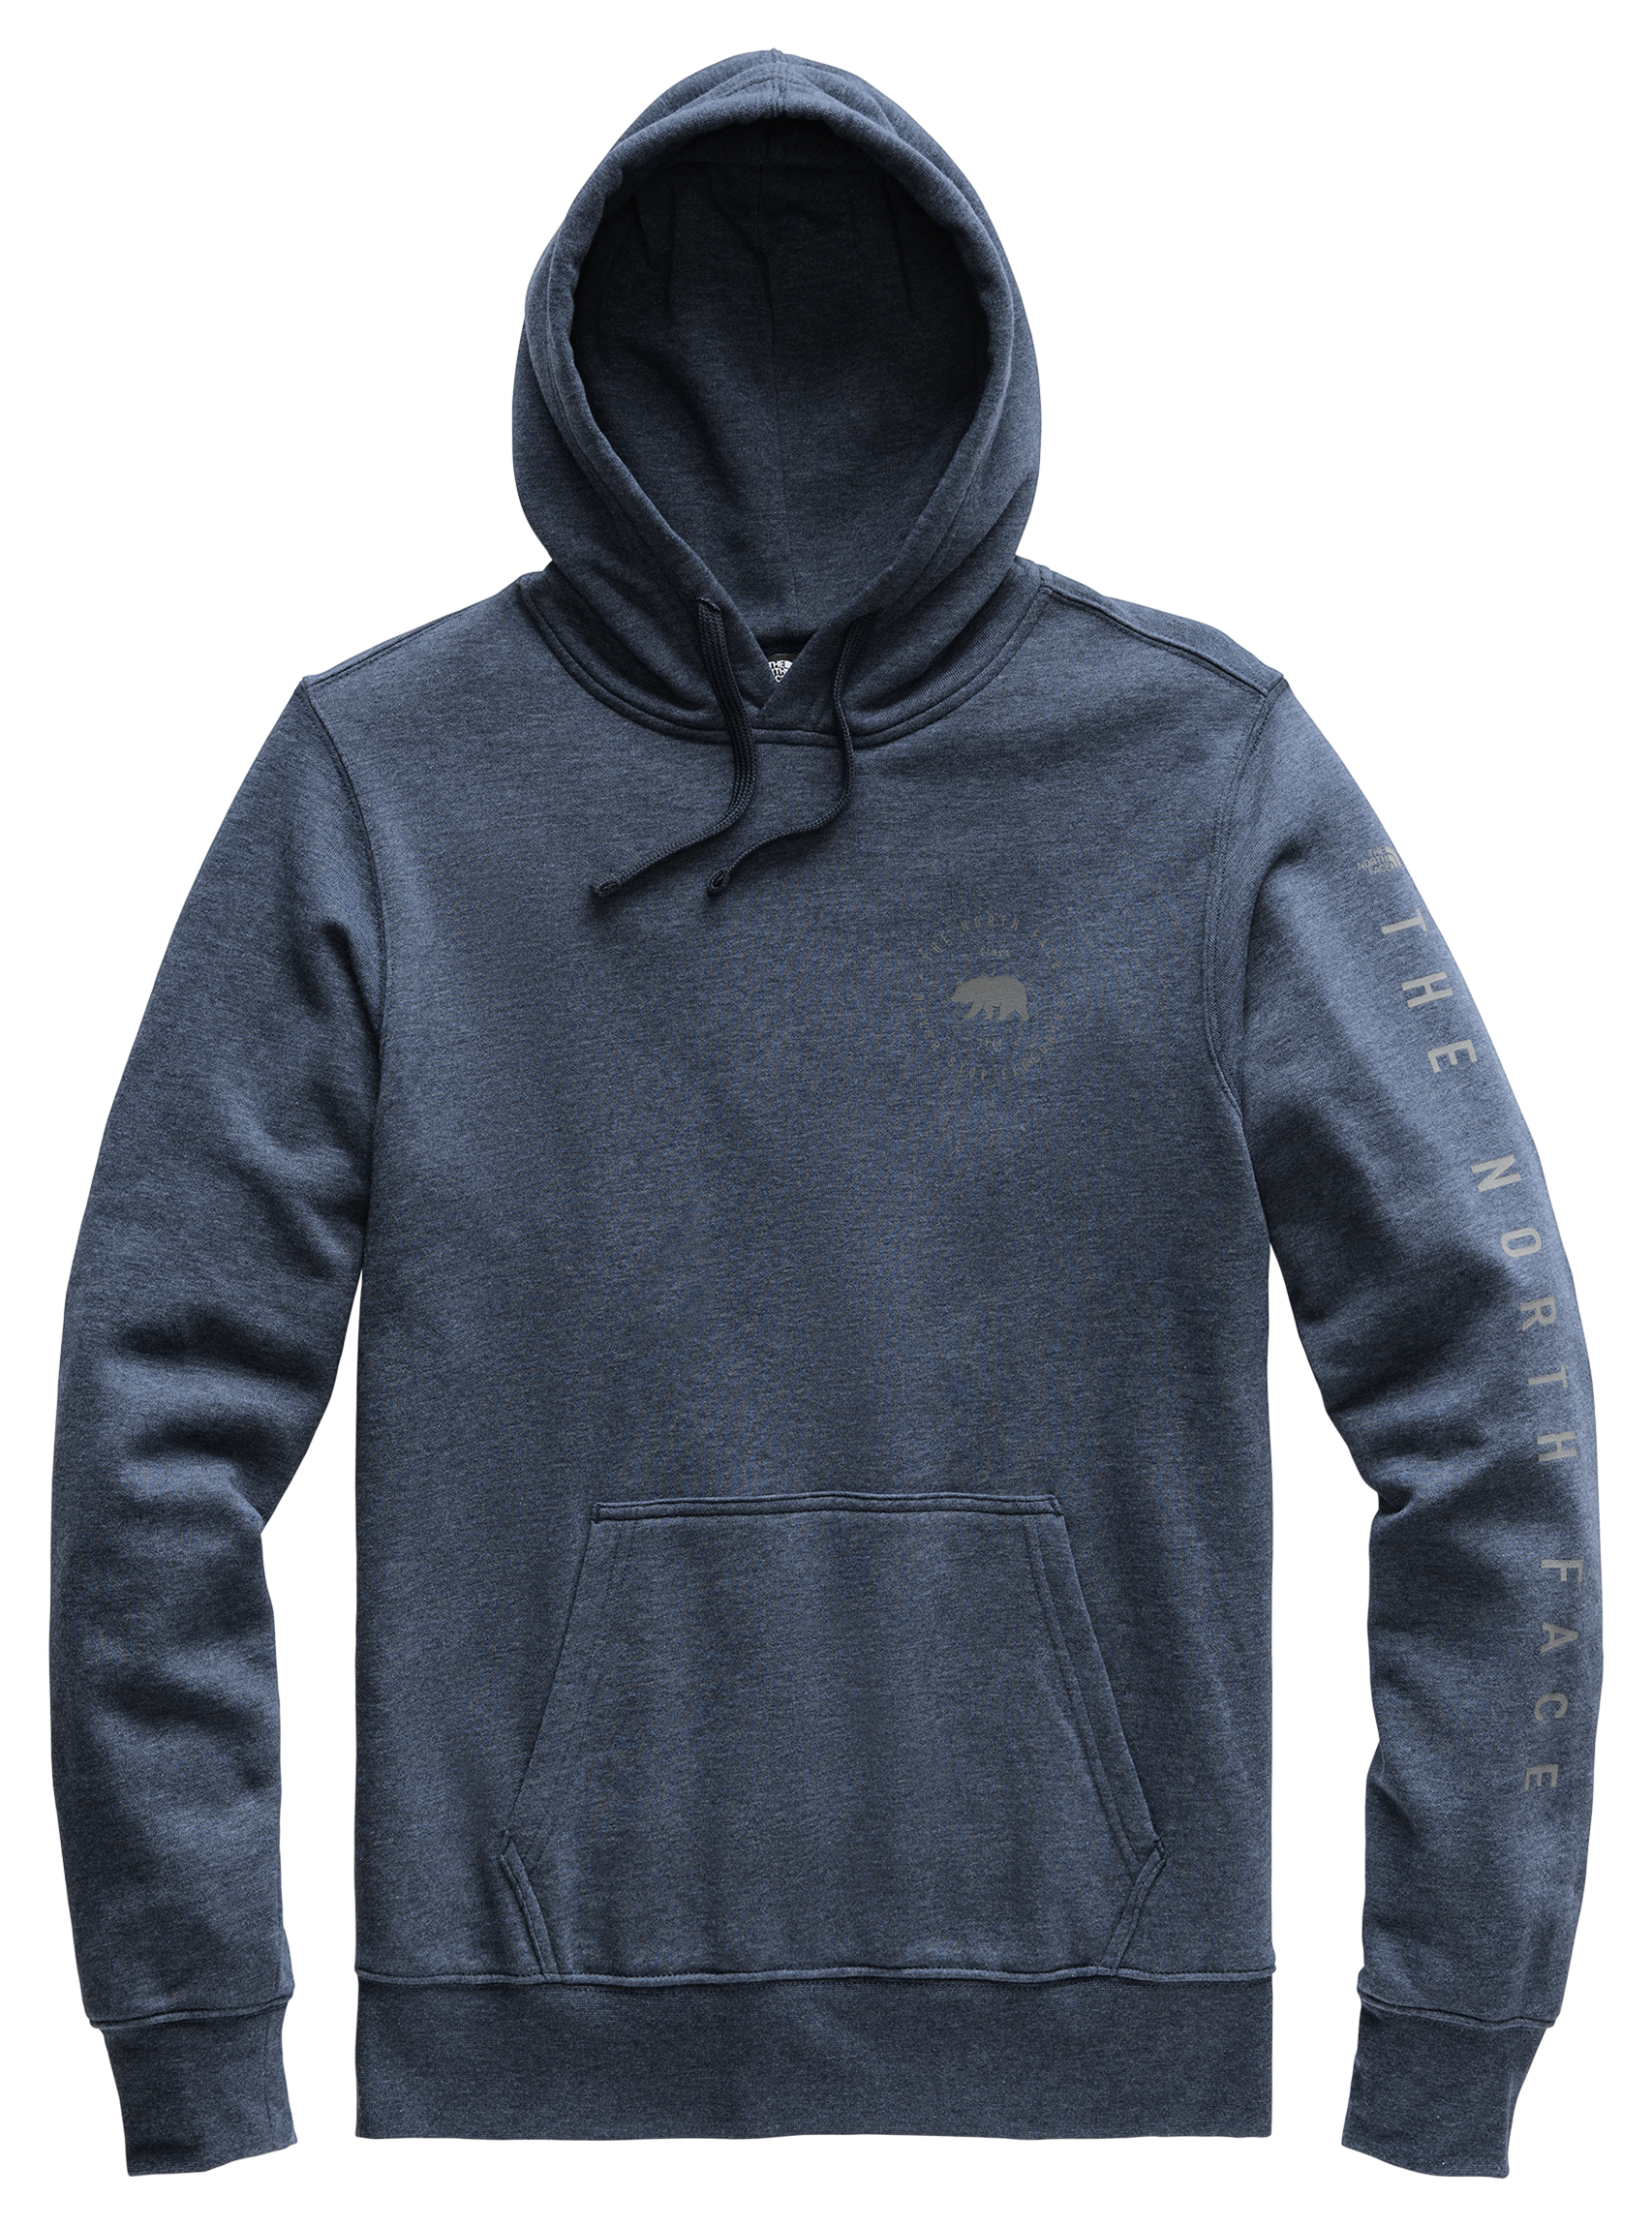 THE NORTH FACE Women's Bearscape 2 Pullover Hoodie